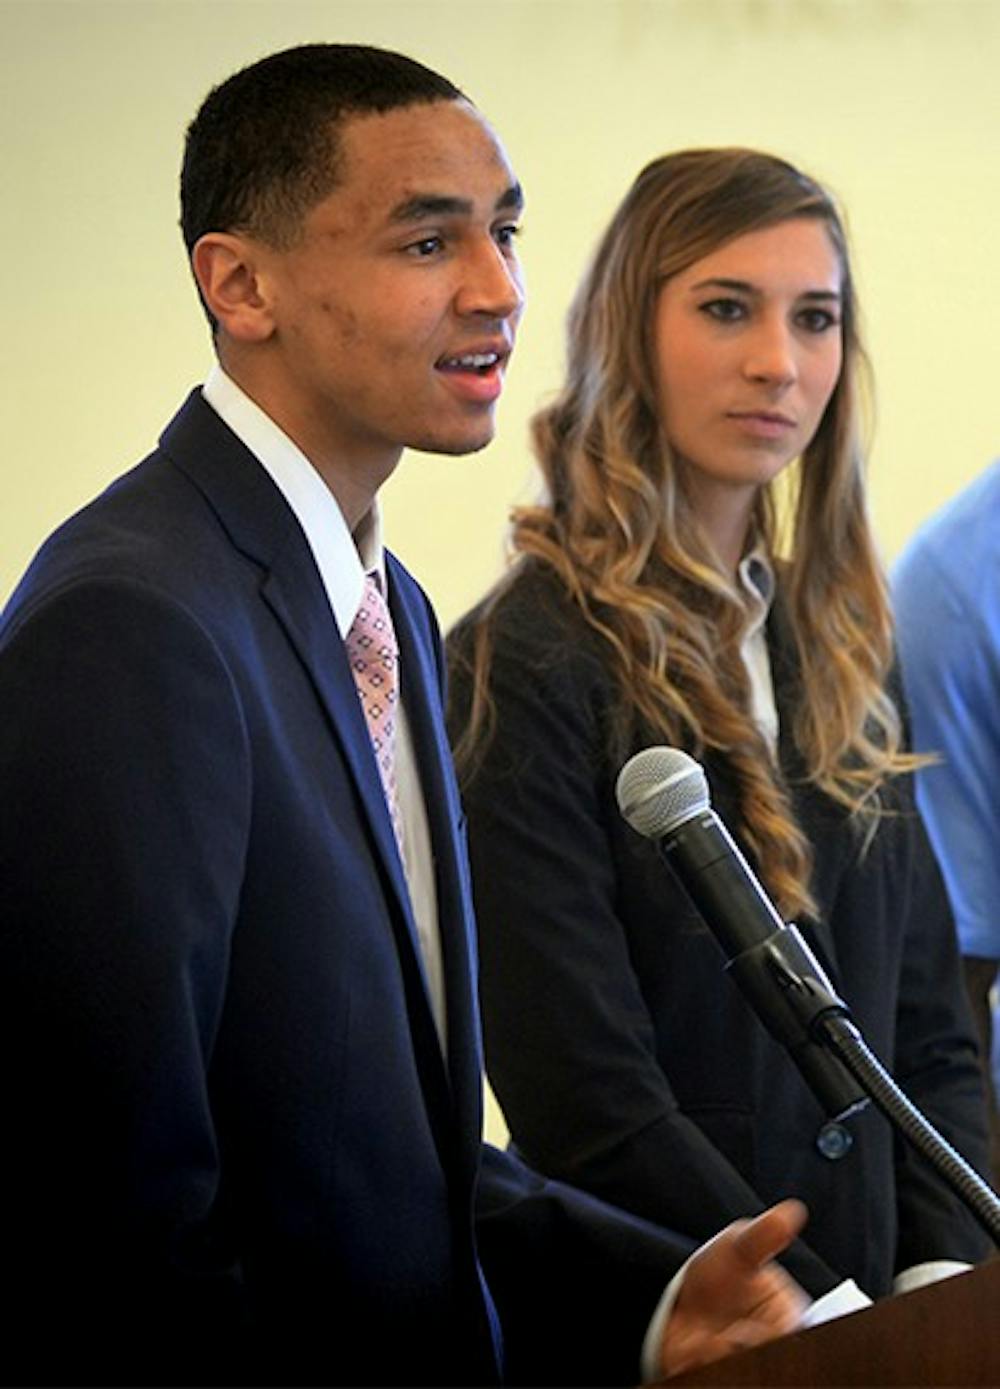 Student athlete Marcus Paige answers a question during the meeting of the Board of Trustees 3/27 at the University of North Carolina at Chapel Hill.  In background are Lori Spingola and Kemmi Pettway.